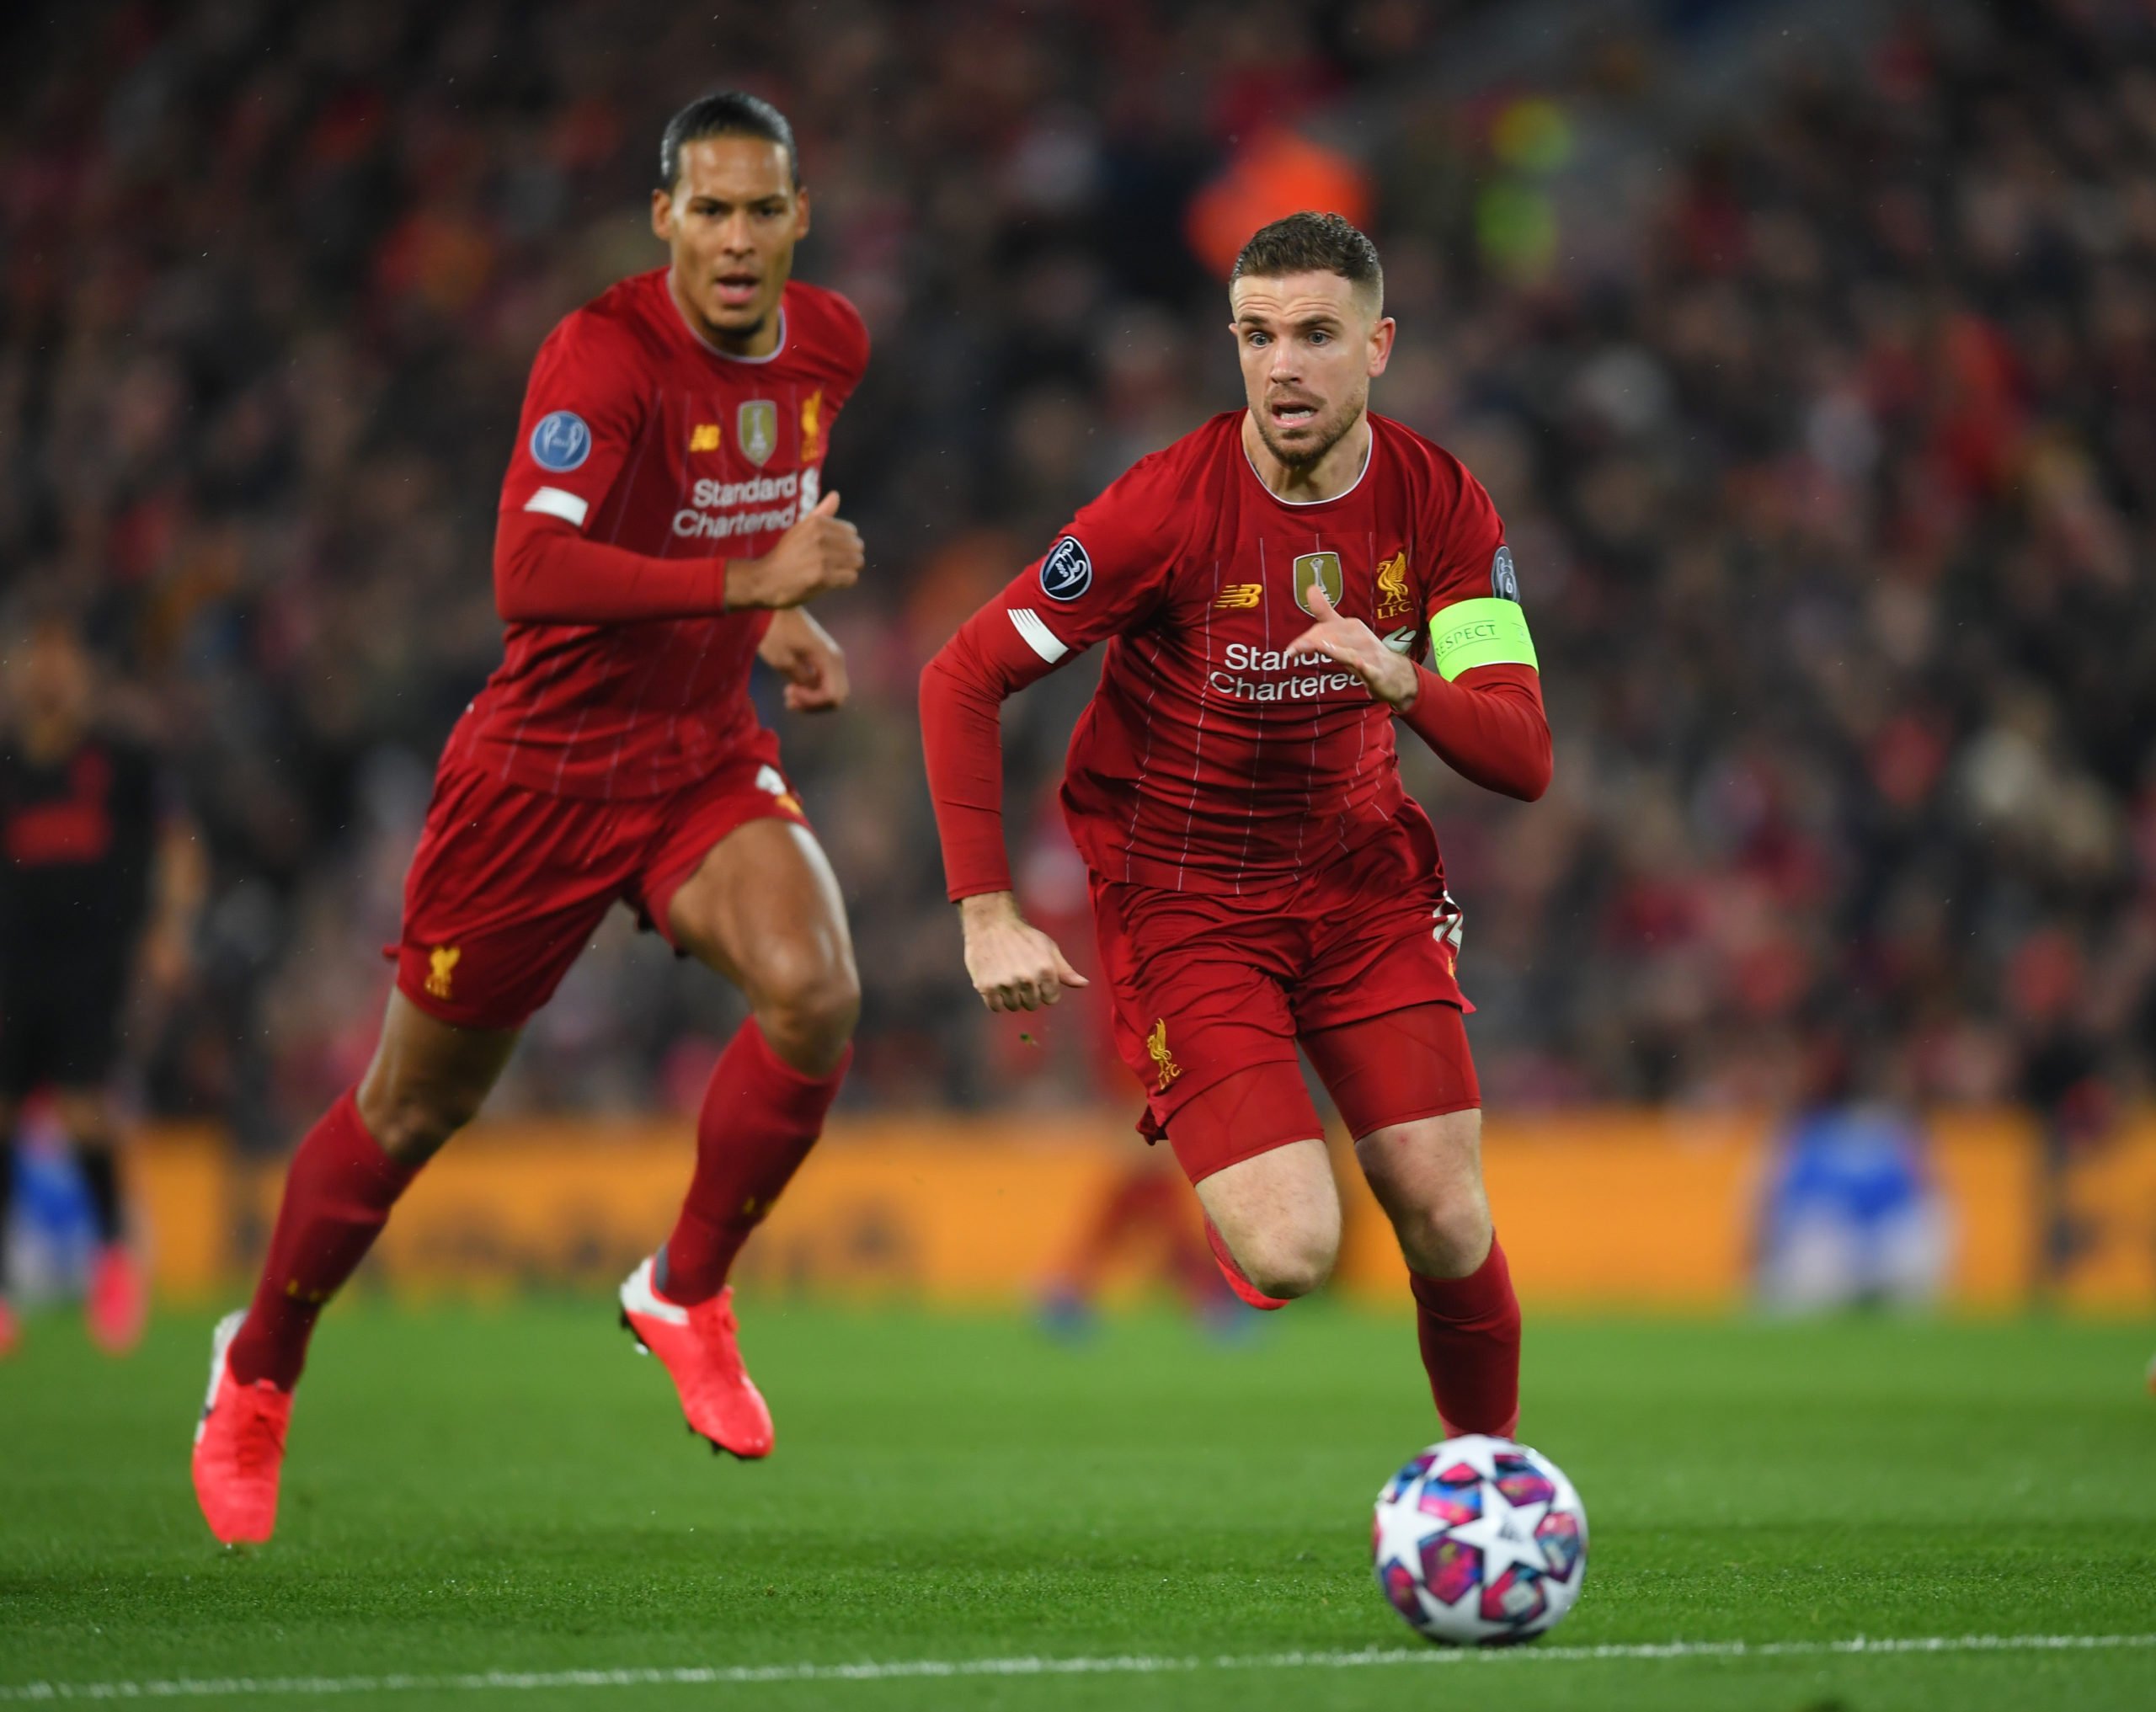 LIVERPOOL, ENGLAND - MARCH 11: Jordan Henderson of Liverpool runs on the ball with Virgil Van Dijk in support during the UEFA Champions League round of 16 second leg match between Liverpool FC and Atletico Madrid at Anfield on March 11, 2020 in Liverpool, United Kingdom. (Photo by Laurence Griffiths/Getty Images)
The 4th Official uses images provided by the following image agency:
Getty Images (https://www.gettyimages.de/)
Imago Images (https://www.imago-images.de/)